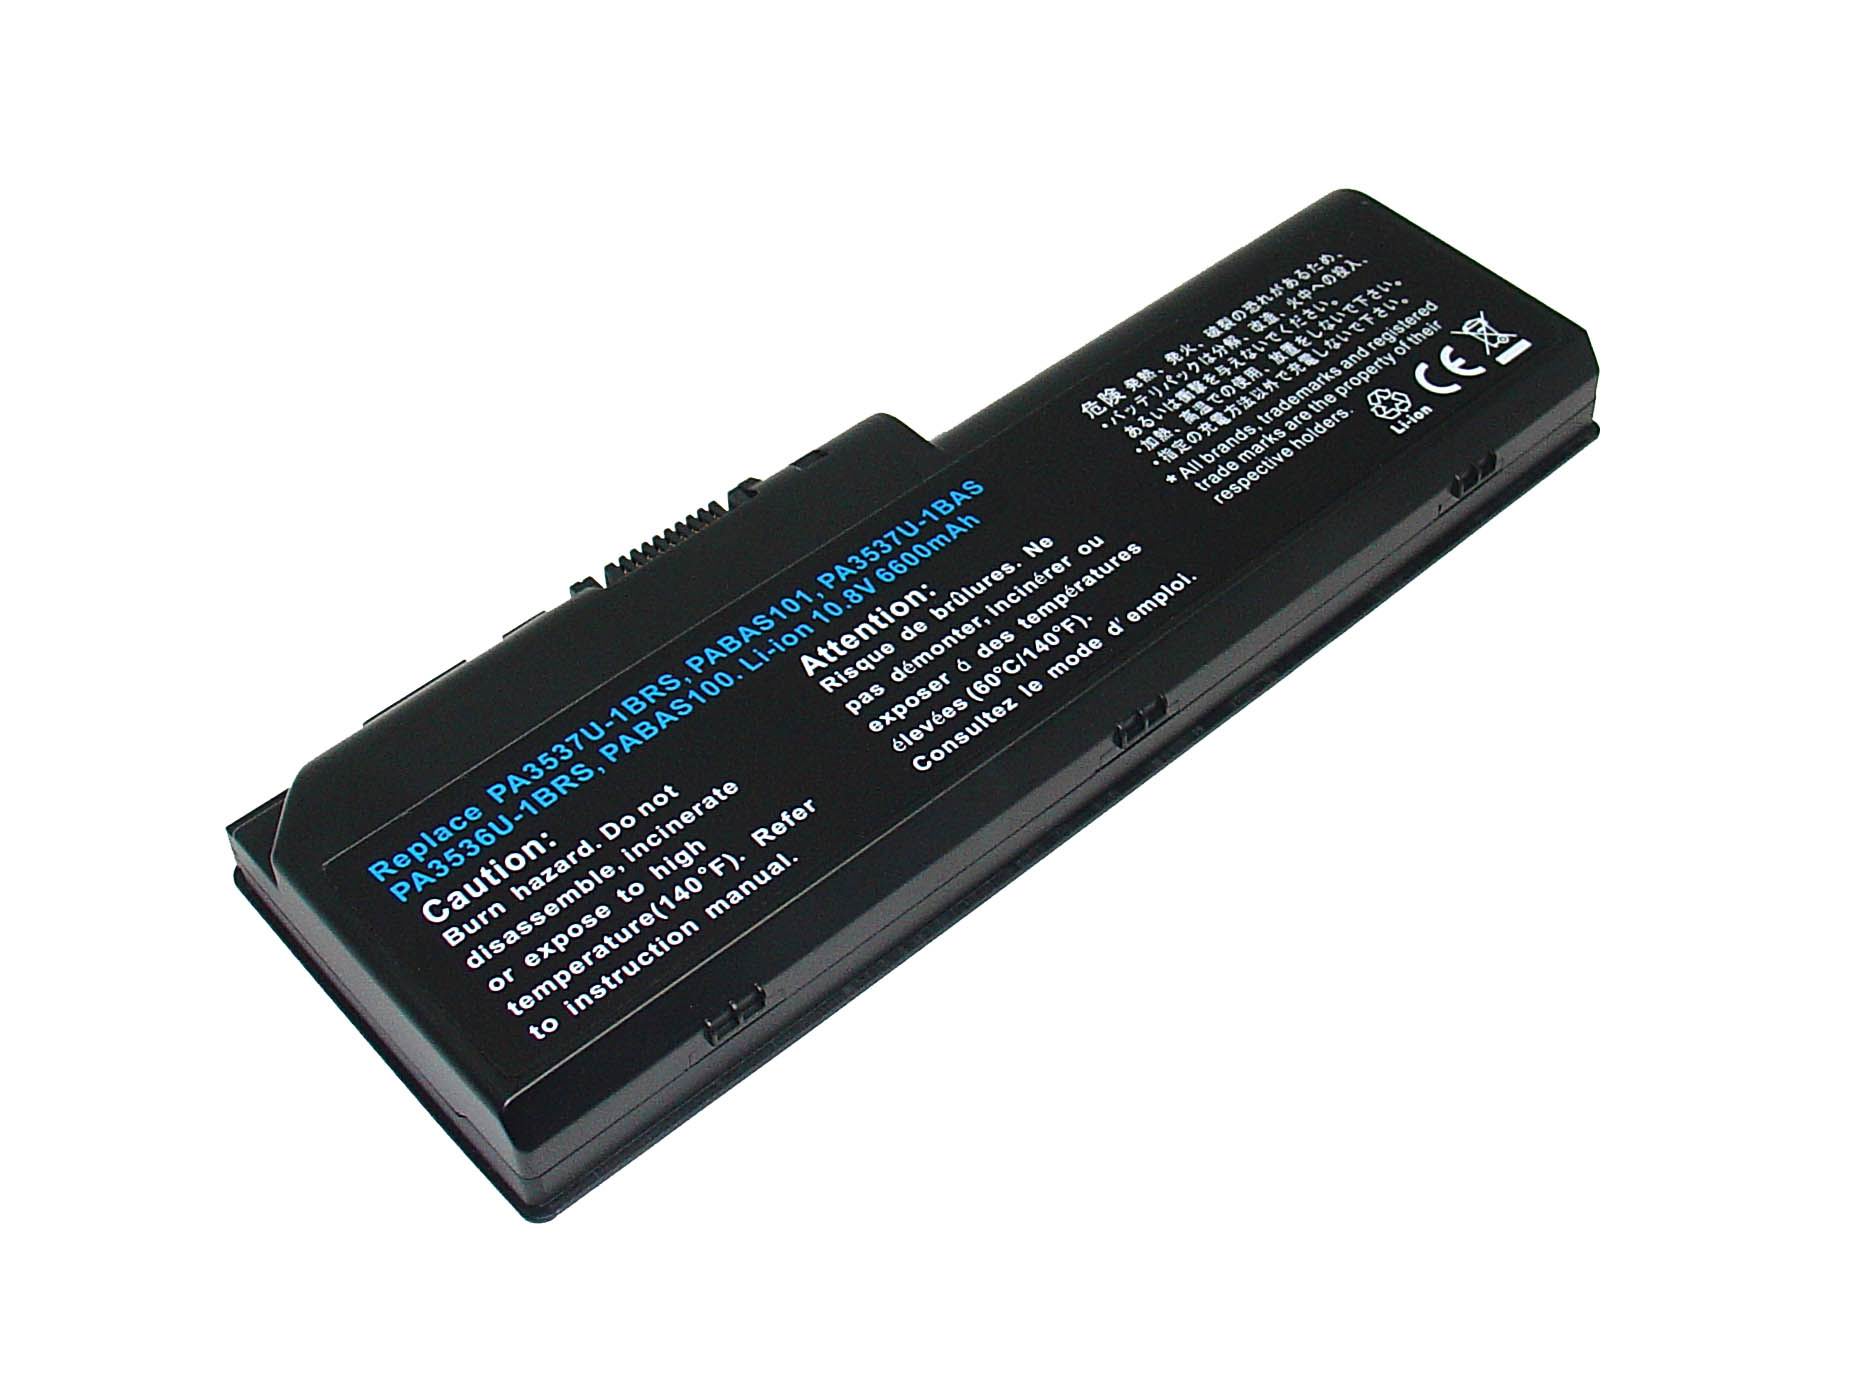 Replacement TOSHIBA Satellite P200D-107 Laptop Battery